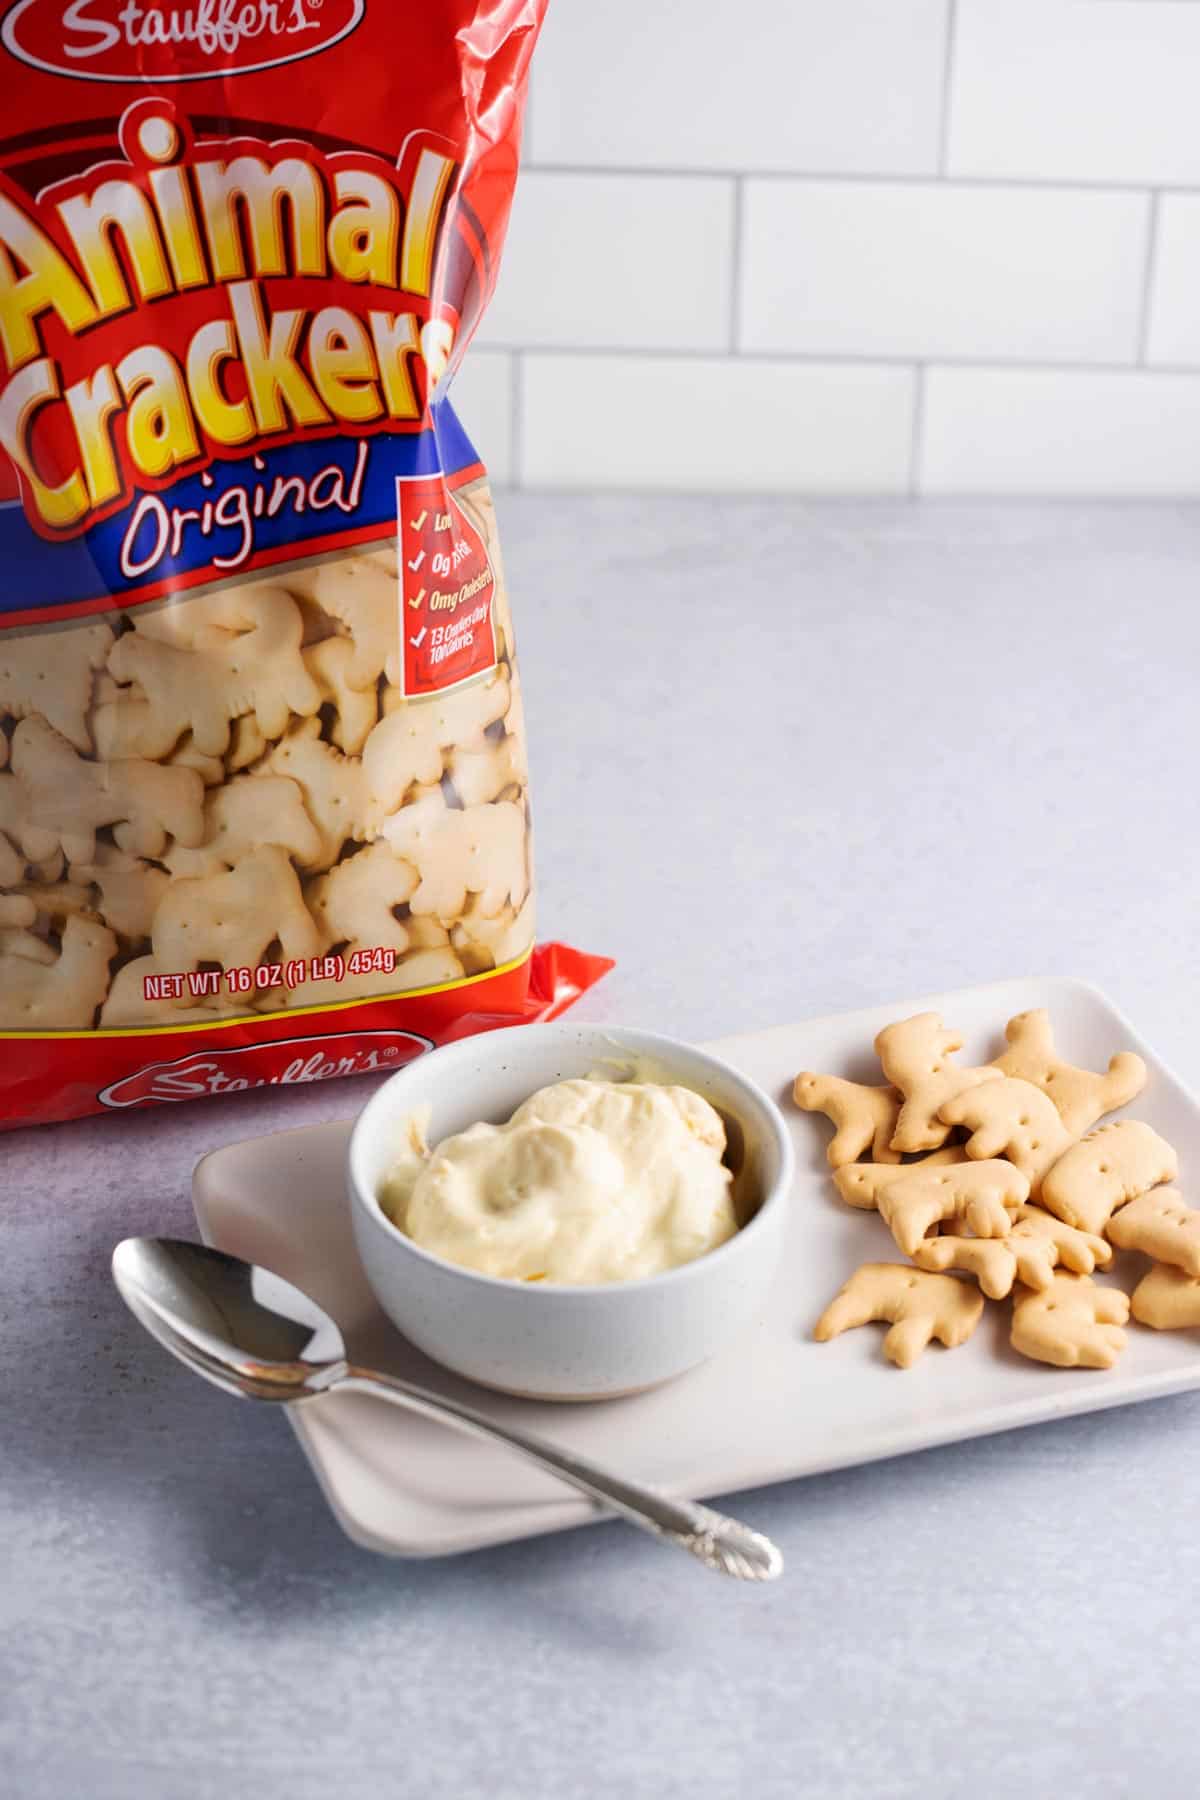 A bowl of banana pudding made with animal crackers with a package of animal crackers in the background.